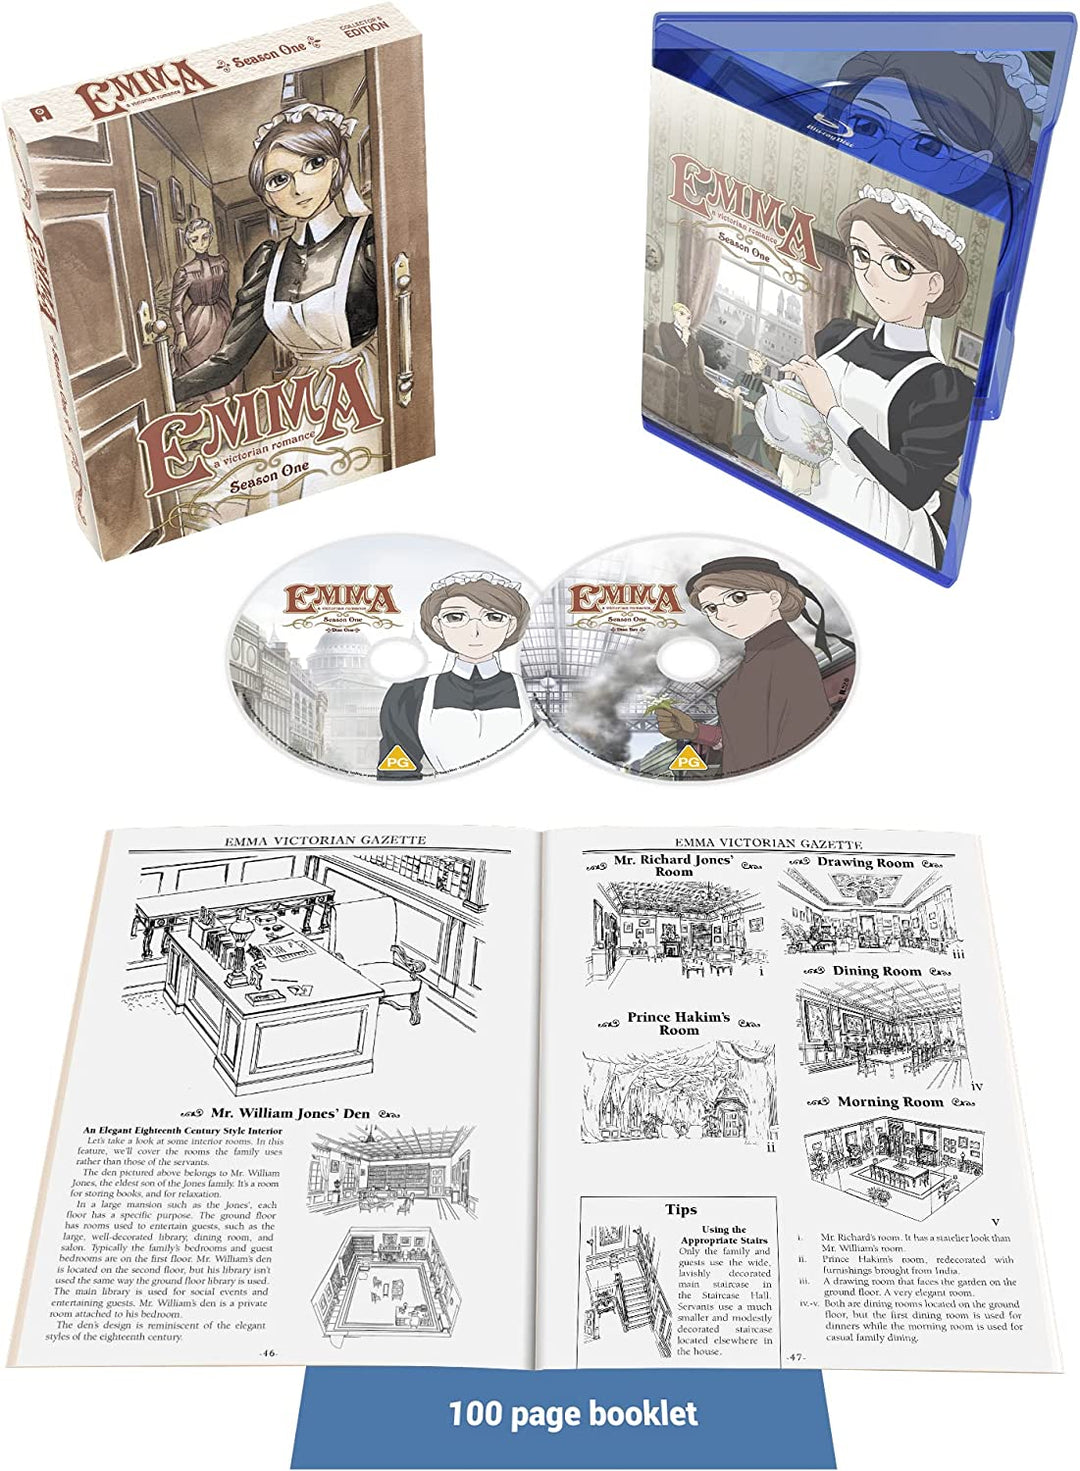 Emma: A Victorian Romance - Season One (Collector's Limited Edition) [Blu-ray]